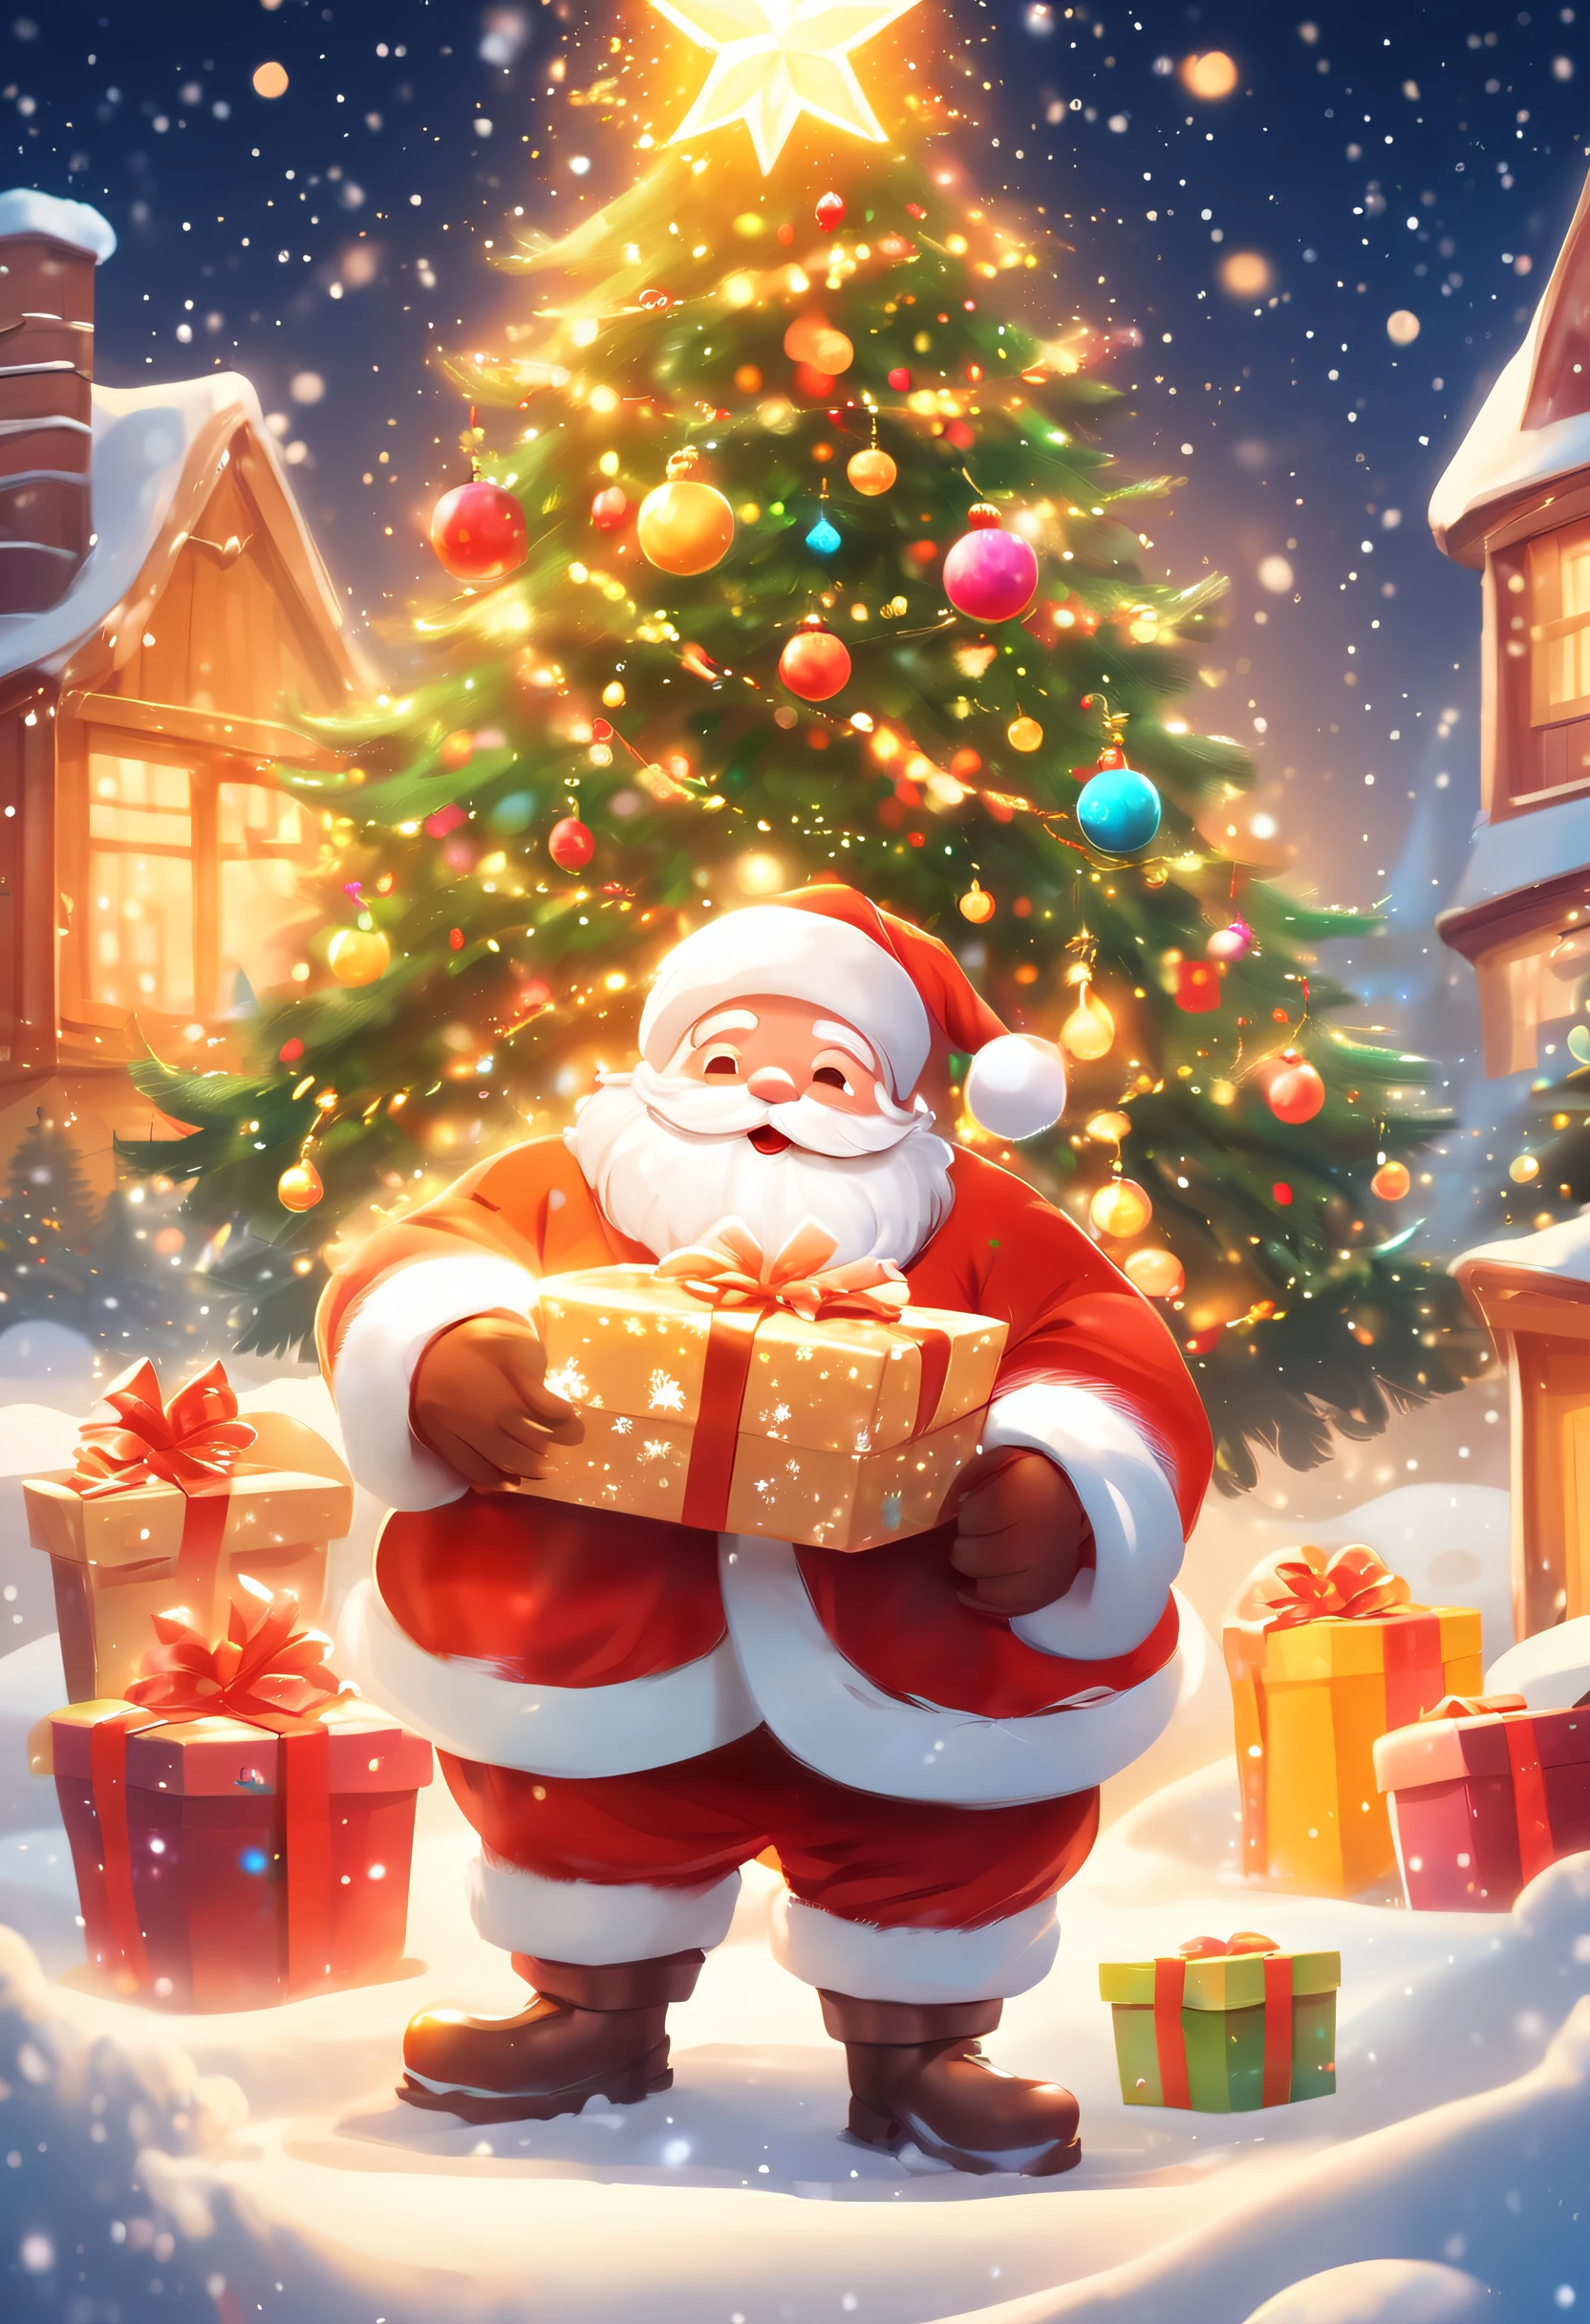 3 Rendering, christmas eve scene, There is a big Christmas tree in the middle of the poster, Decorate with colorful lights, star curtain in sky, and gift box on the snow. Cute and kind Santa Claus holding gifts, warm yellow background and bright night